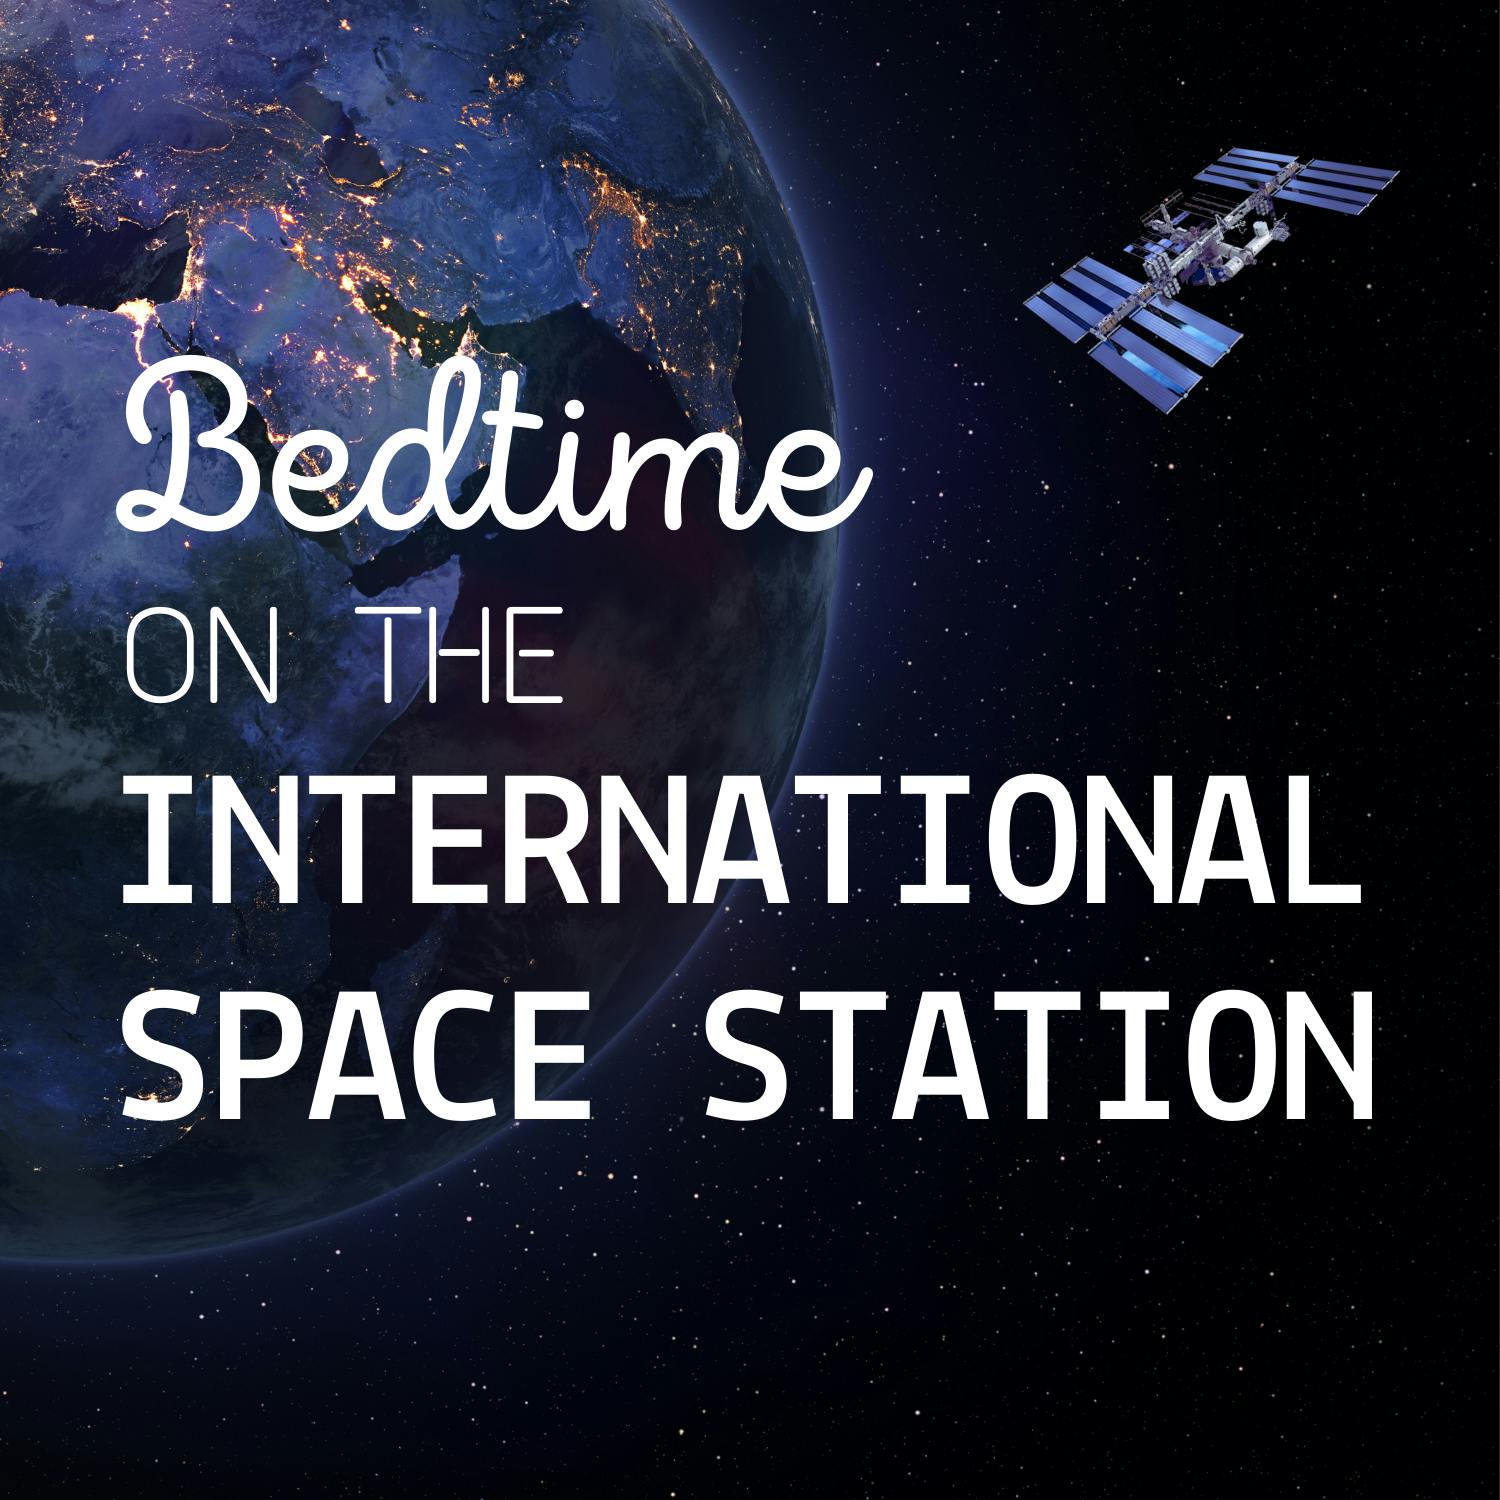 Bedtime on the International Space Station